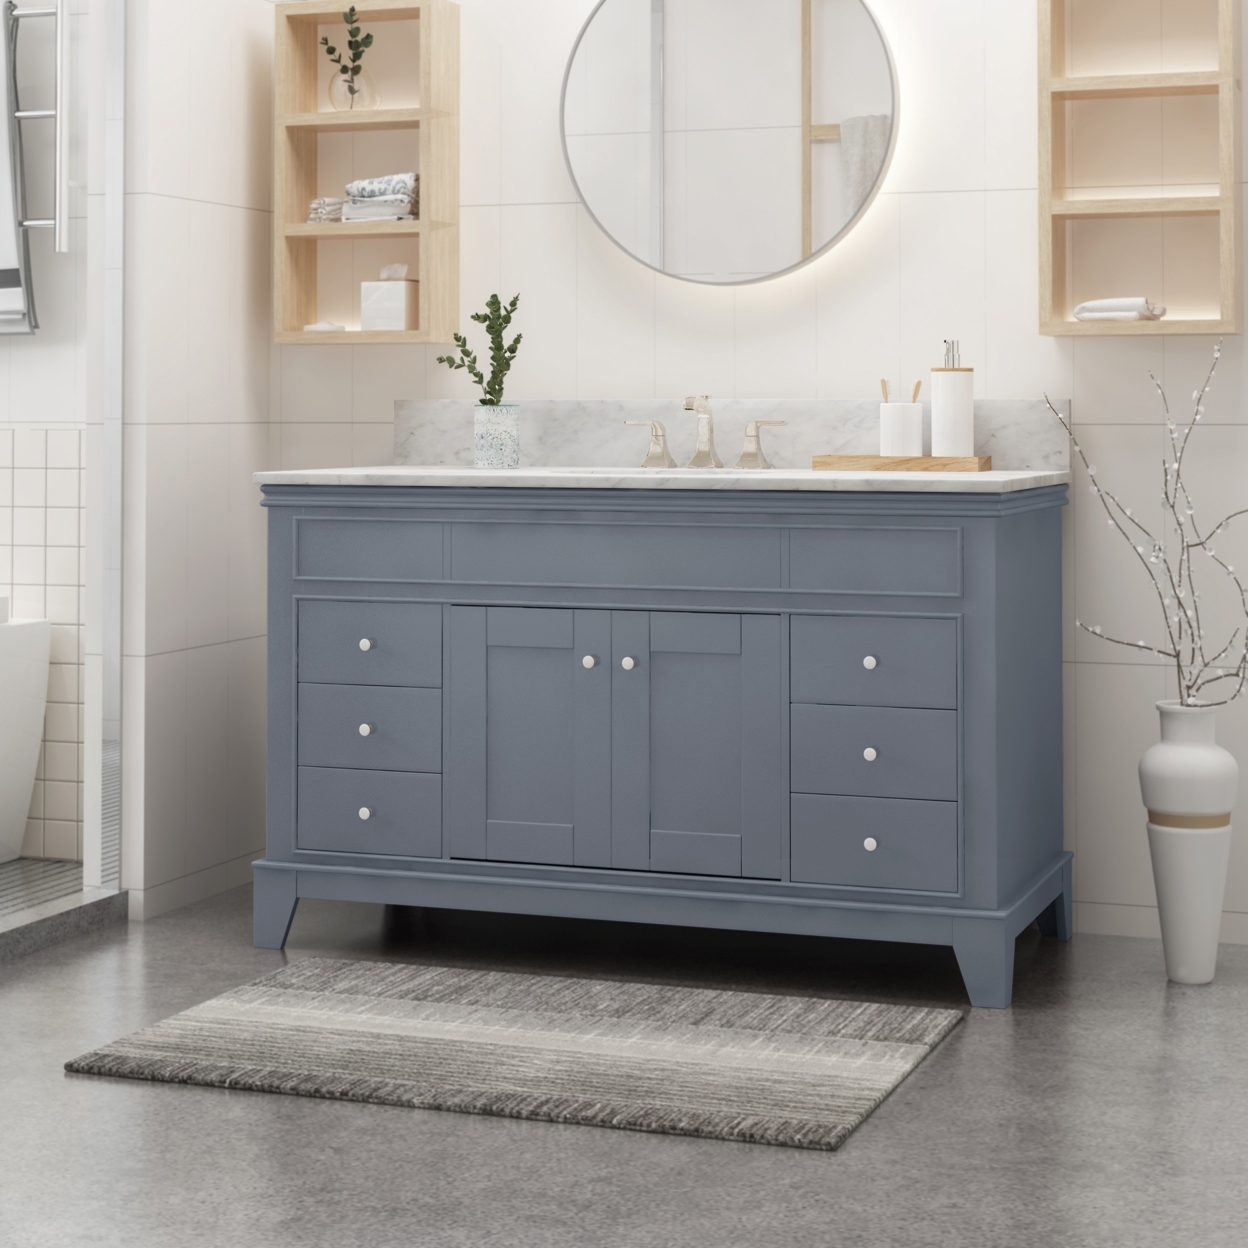 Feldspar Contemporary 48 Wood Single Sink Bathroom Vanity With Marble Counter Top With Carrara White Marble - Gray